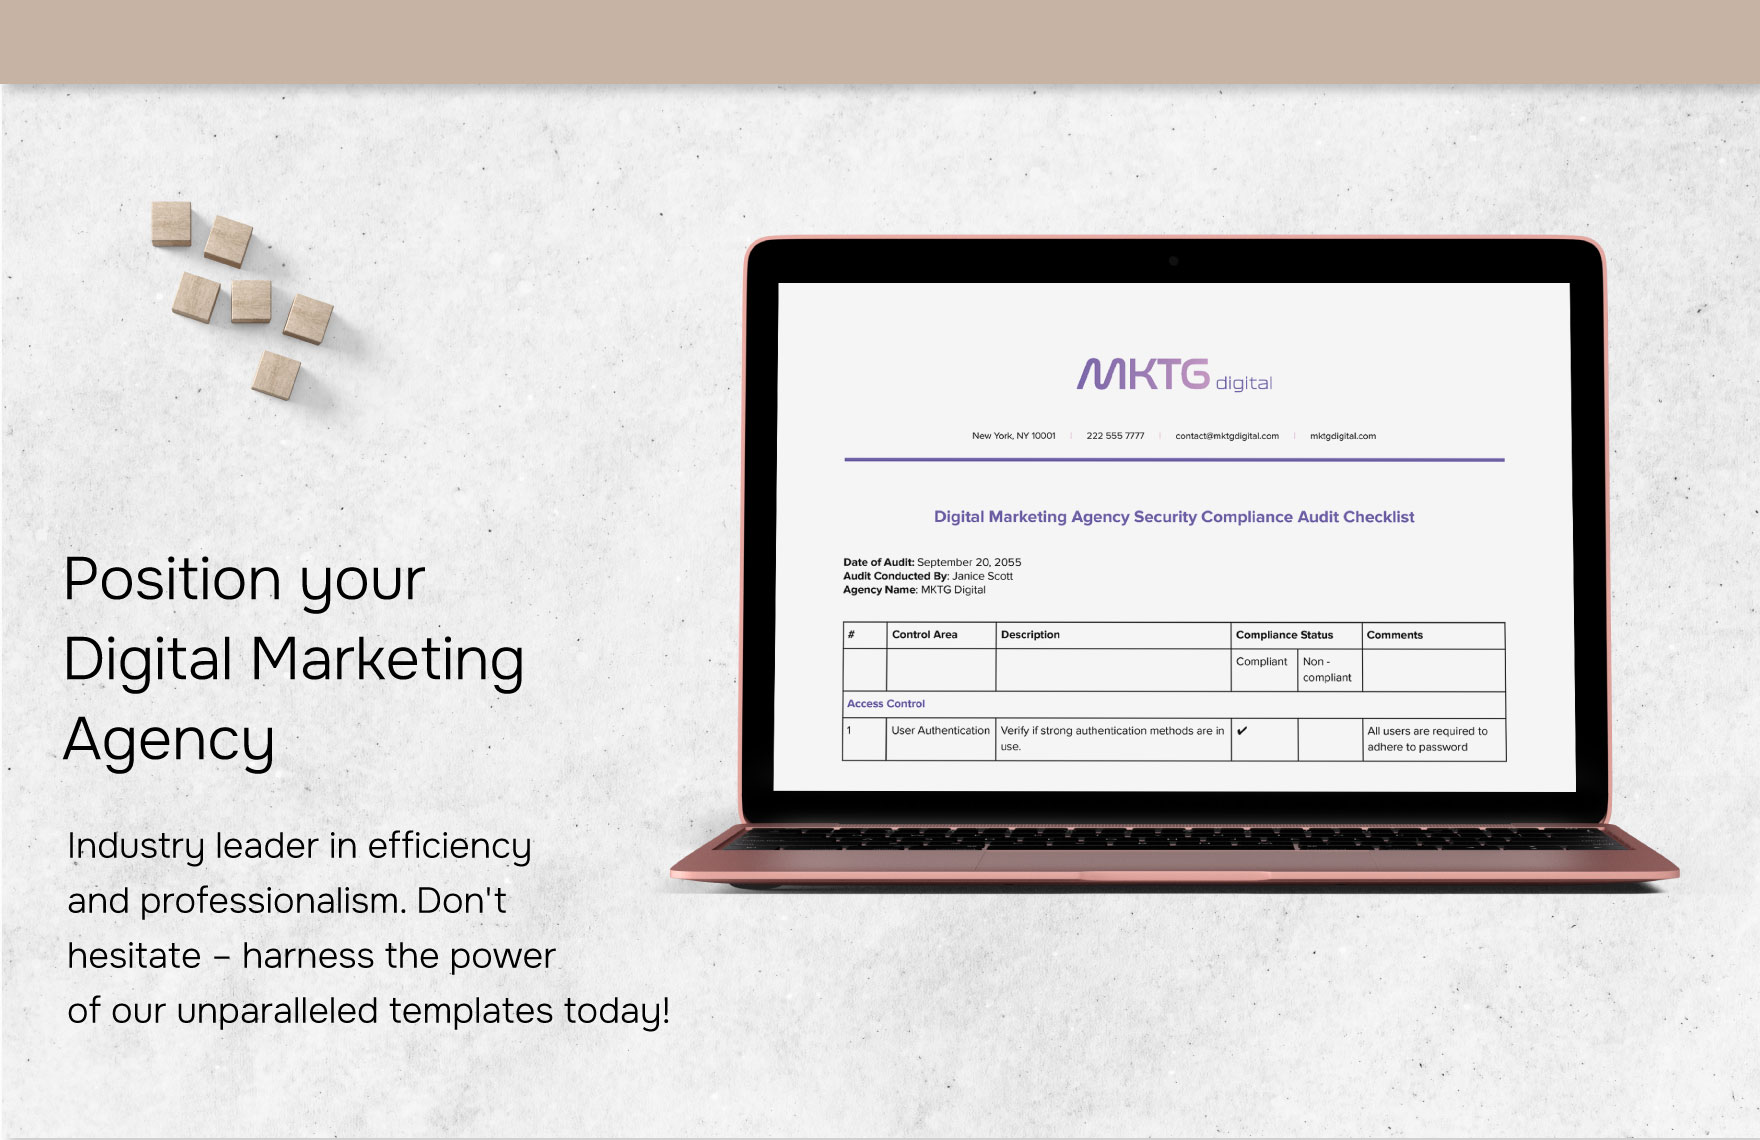 Digital Marketing Agency Security Compliance Audit Checklist Template